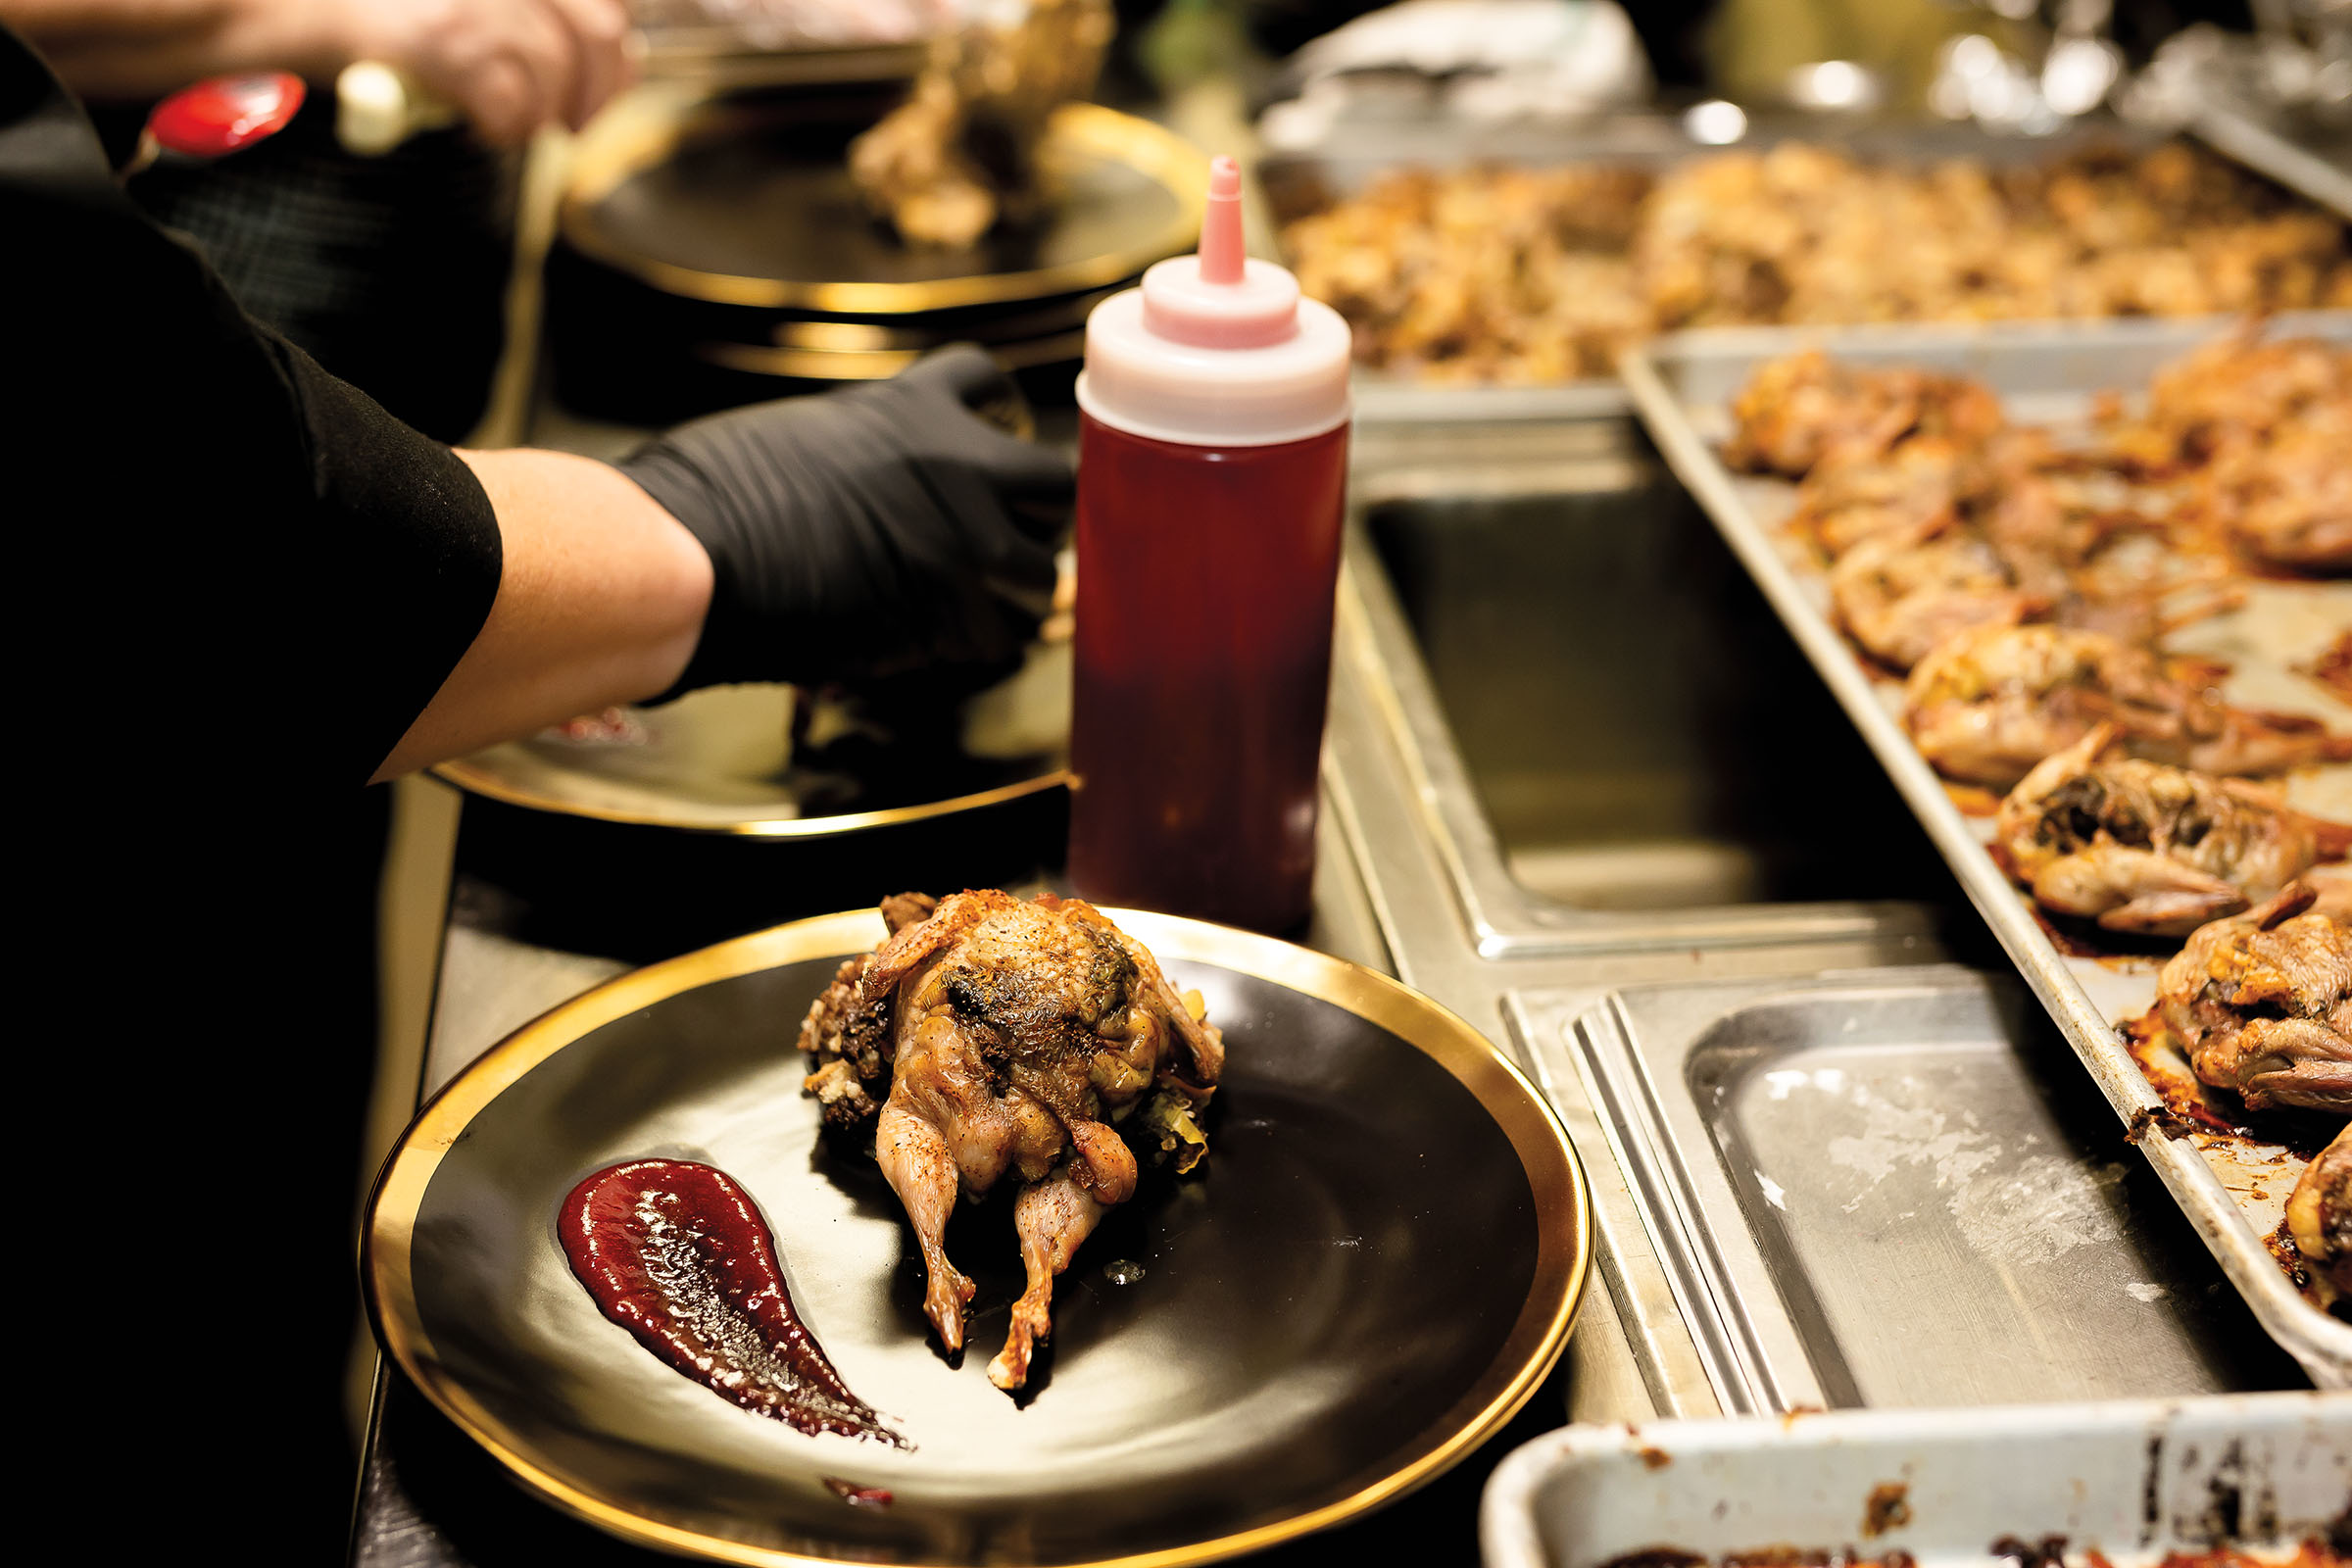 A golden brown roasted quail sits on a shiny plate next to a bright red sauce